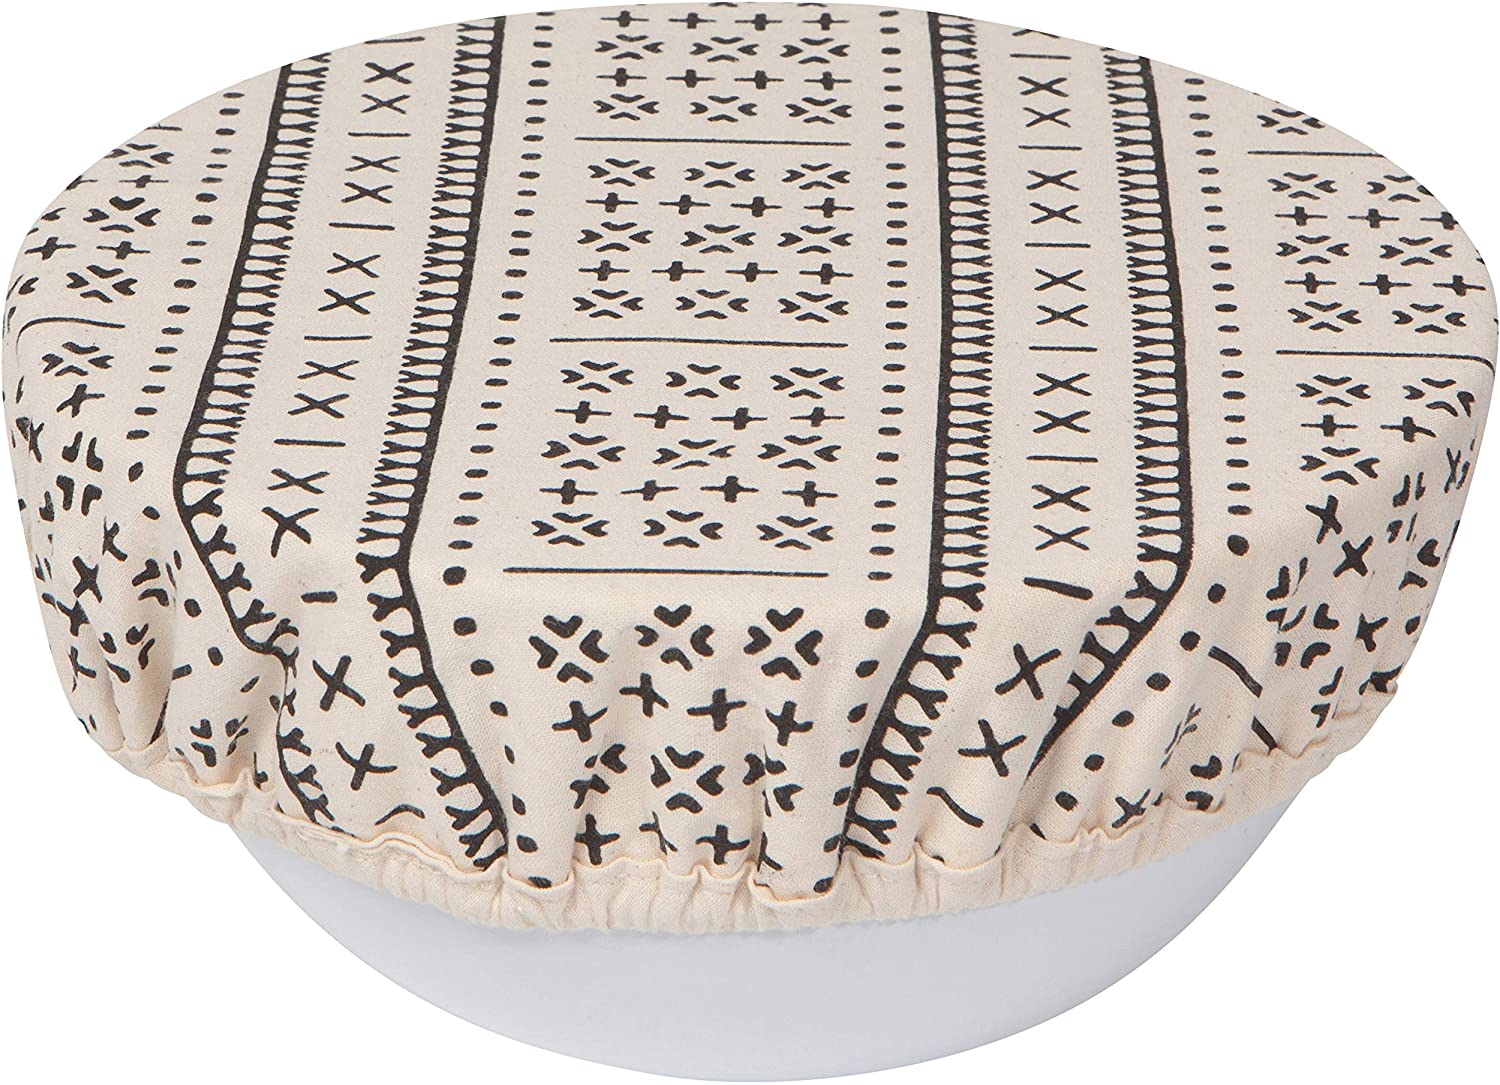 white bowl cover with black lines design.